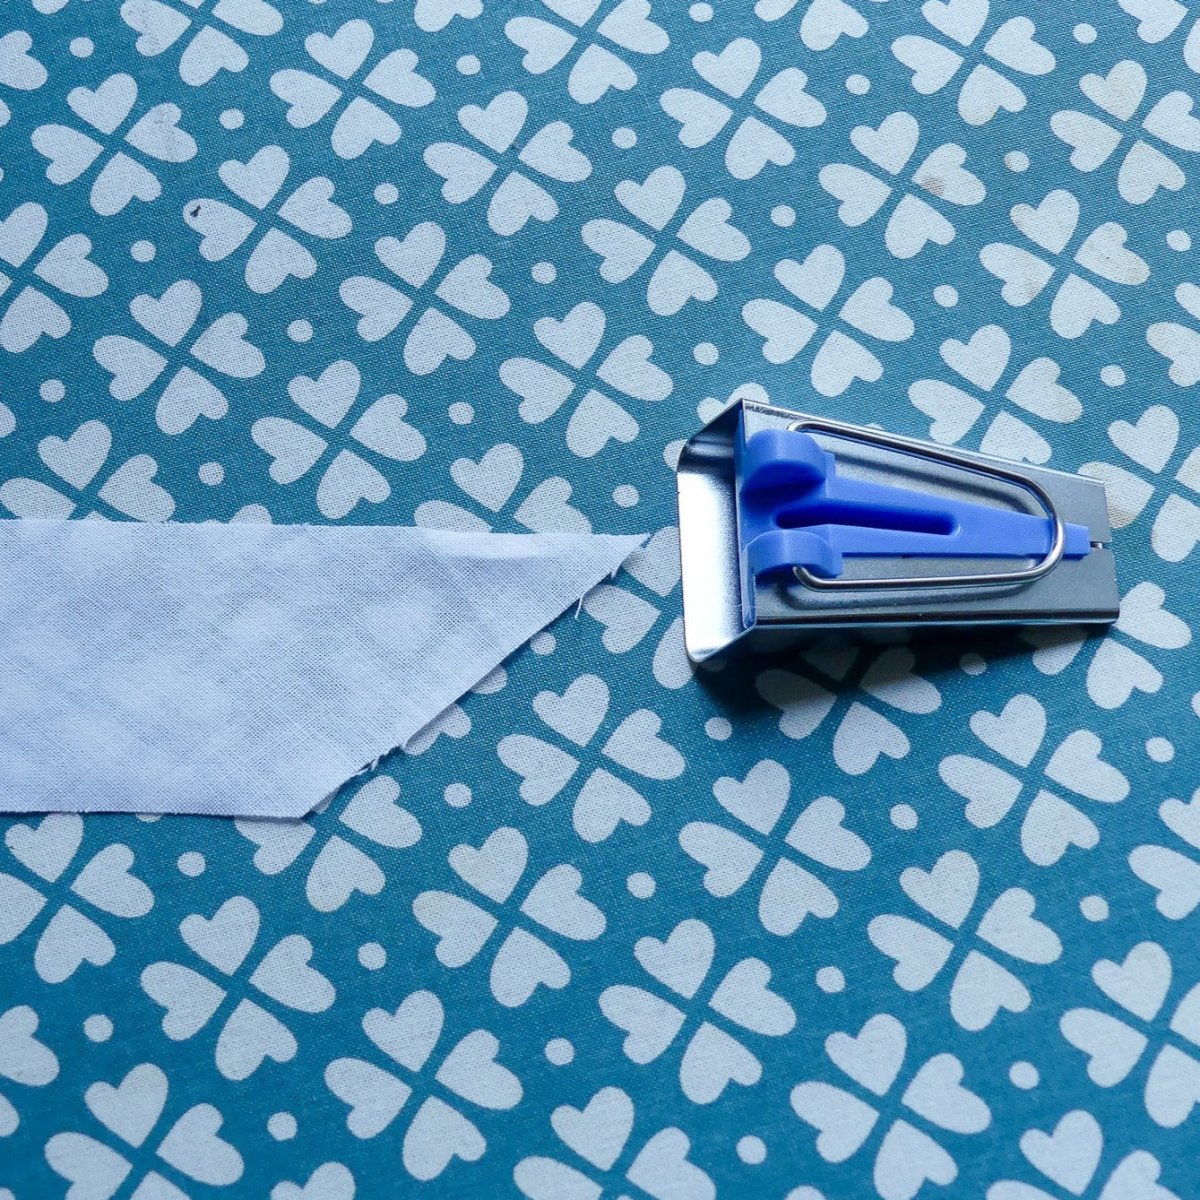 Blue Bias Tape Maker and a fabric strip ready to be fed into it.